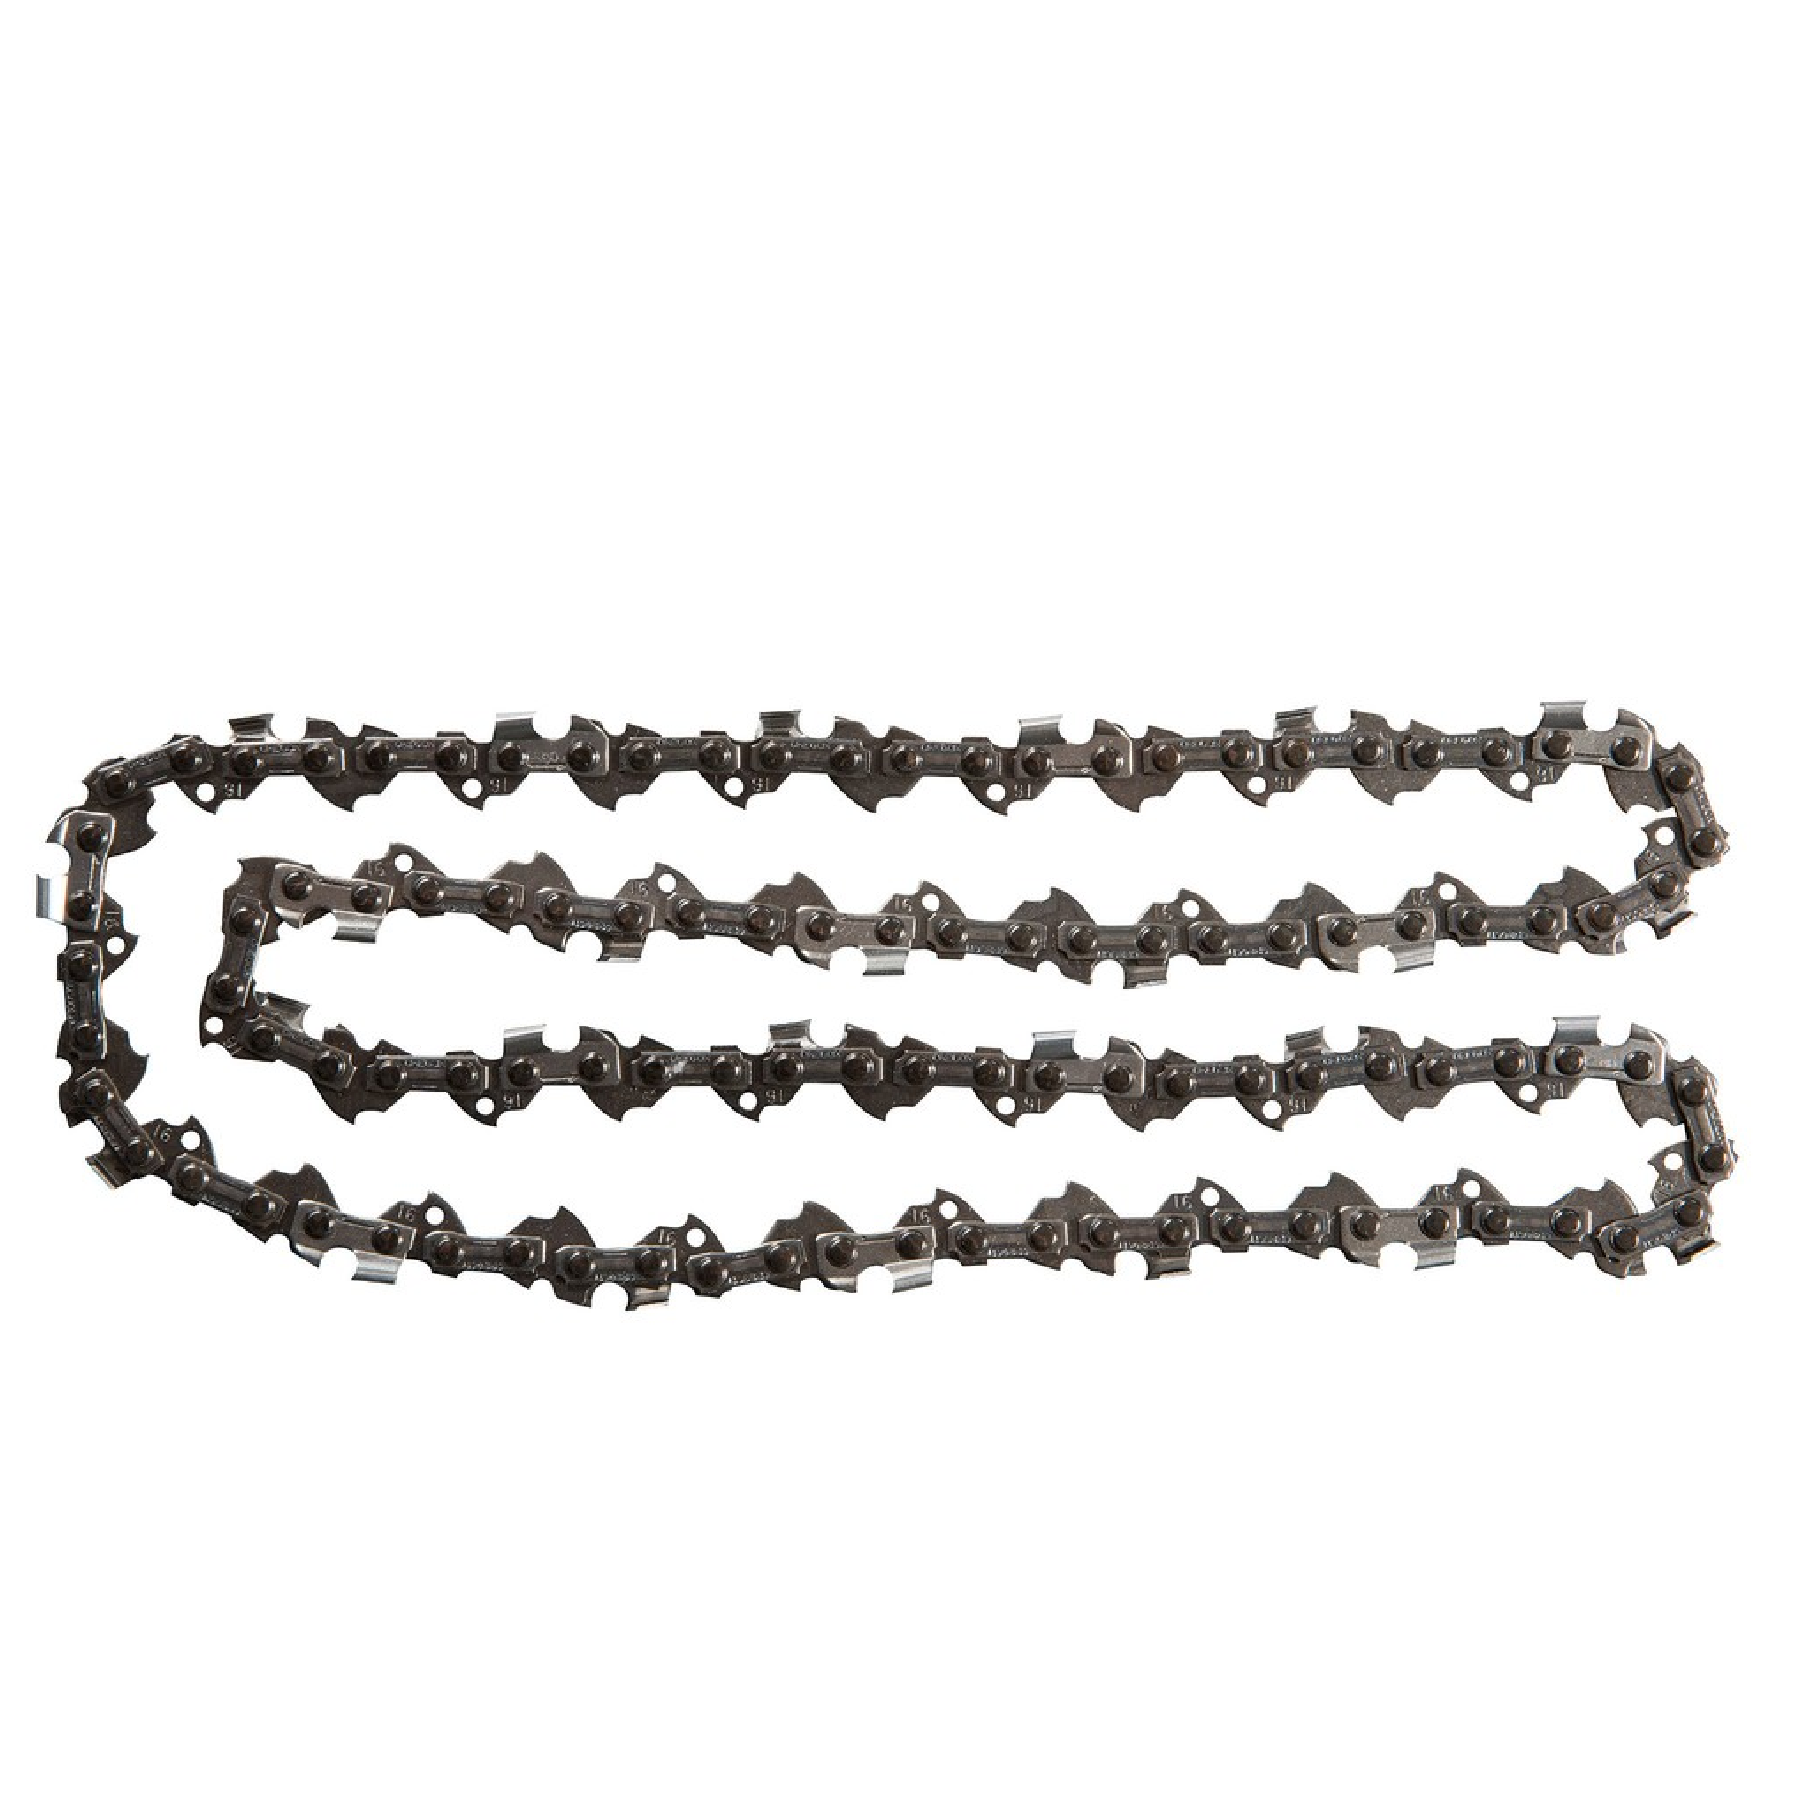 Makita 191H03-4 SAW CHAIN 16"/400MM For Electric Chain Saw